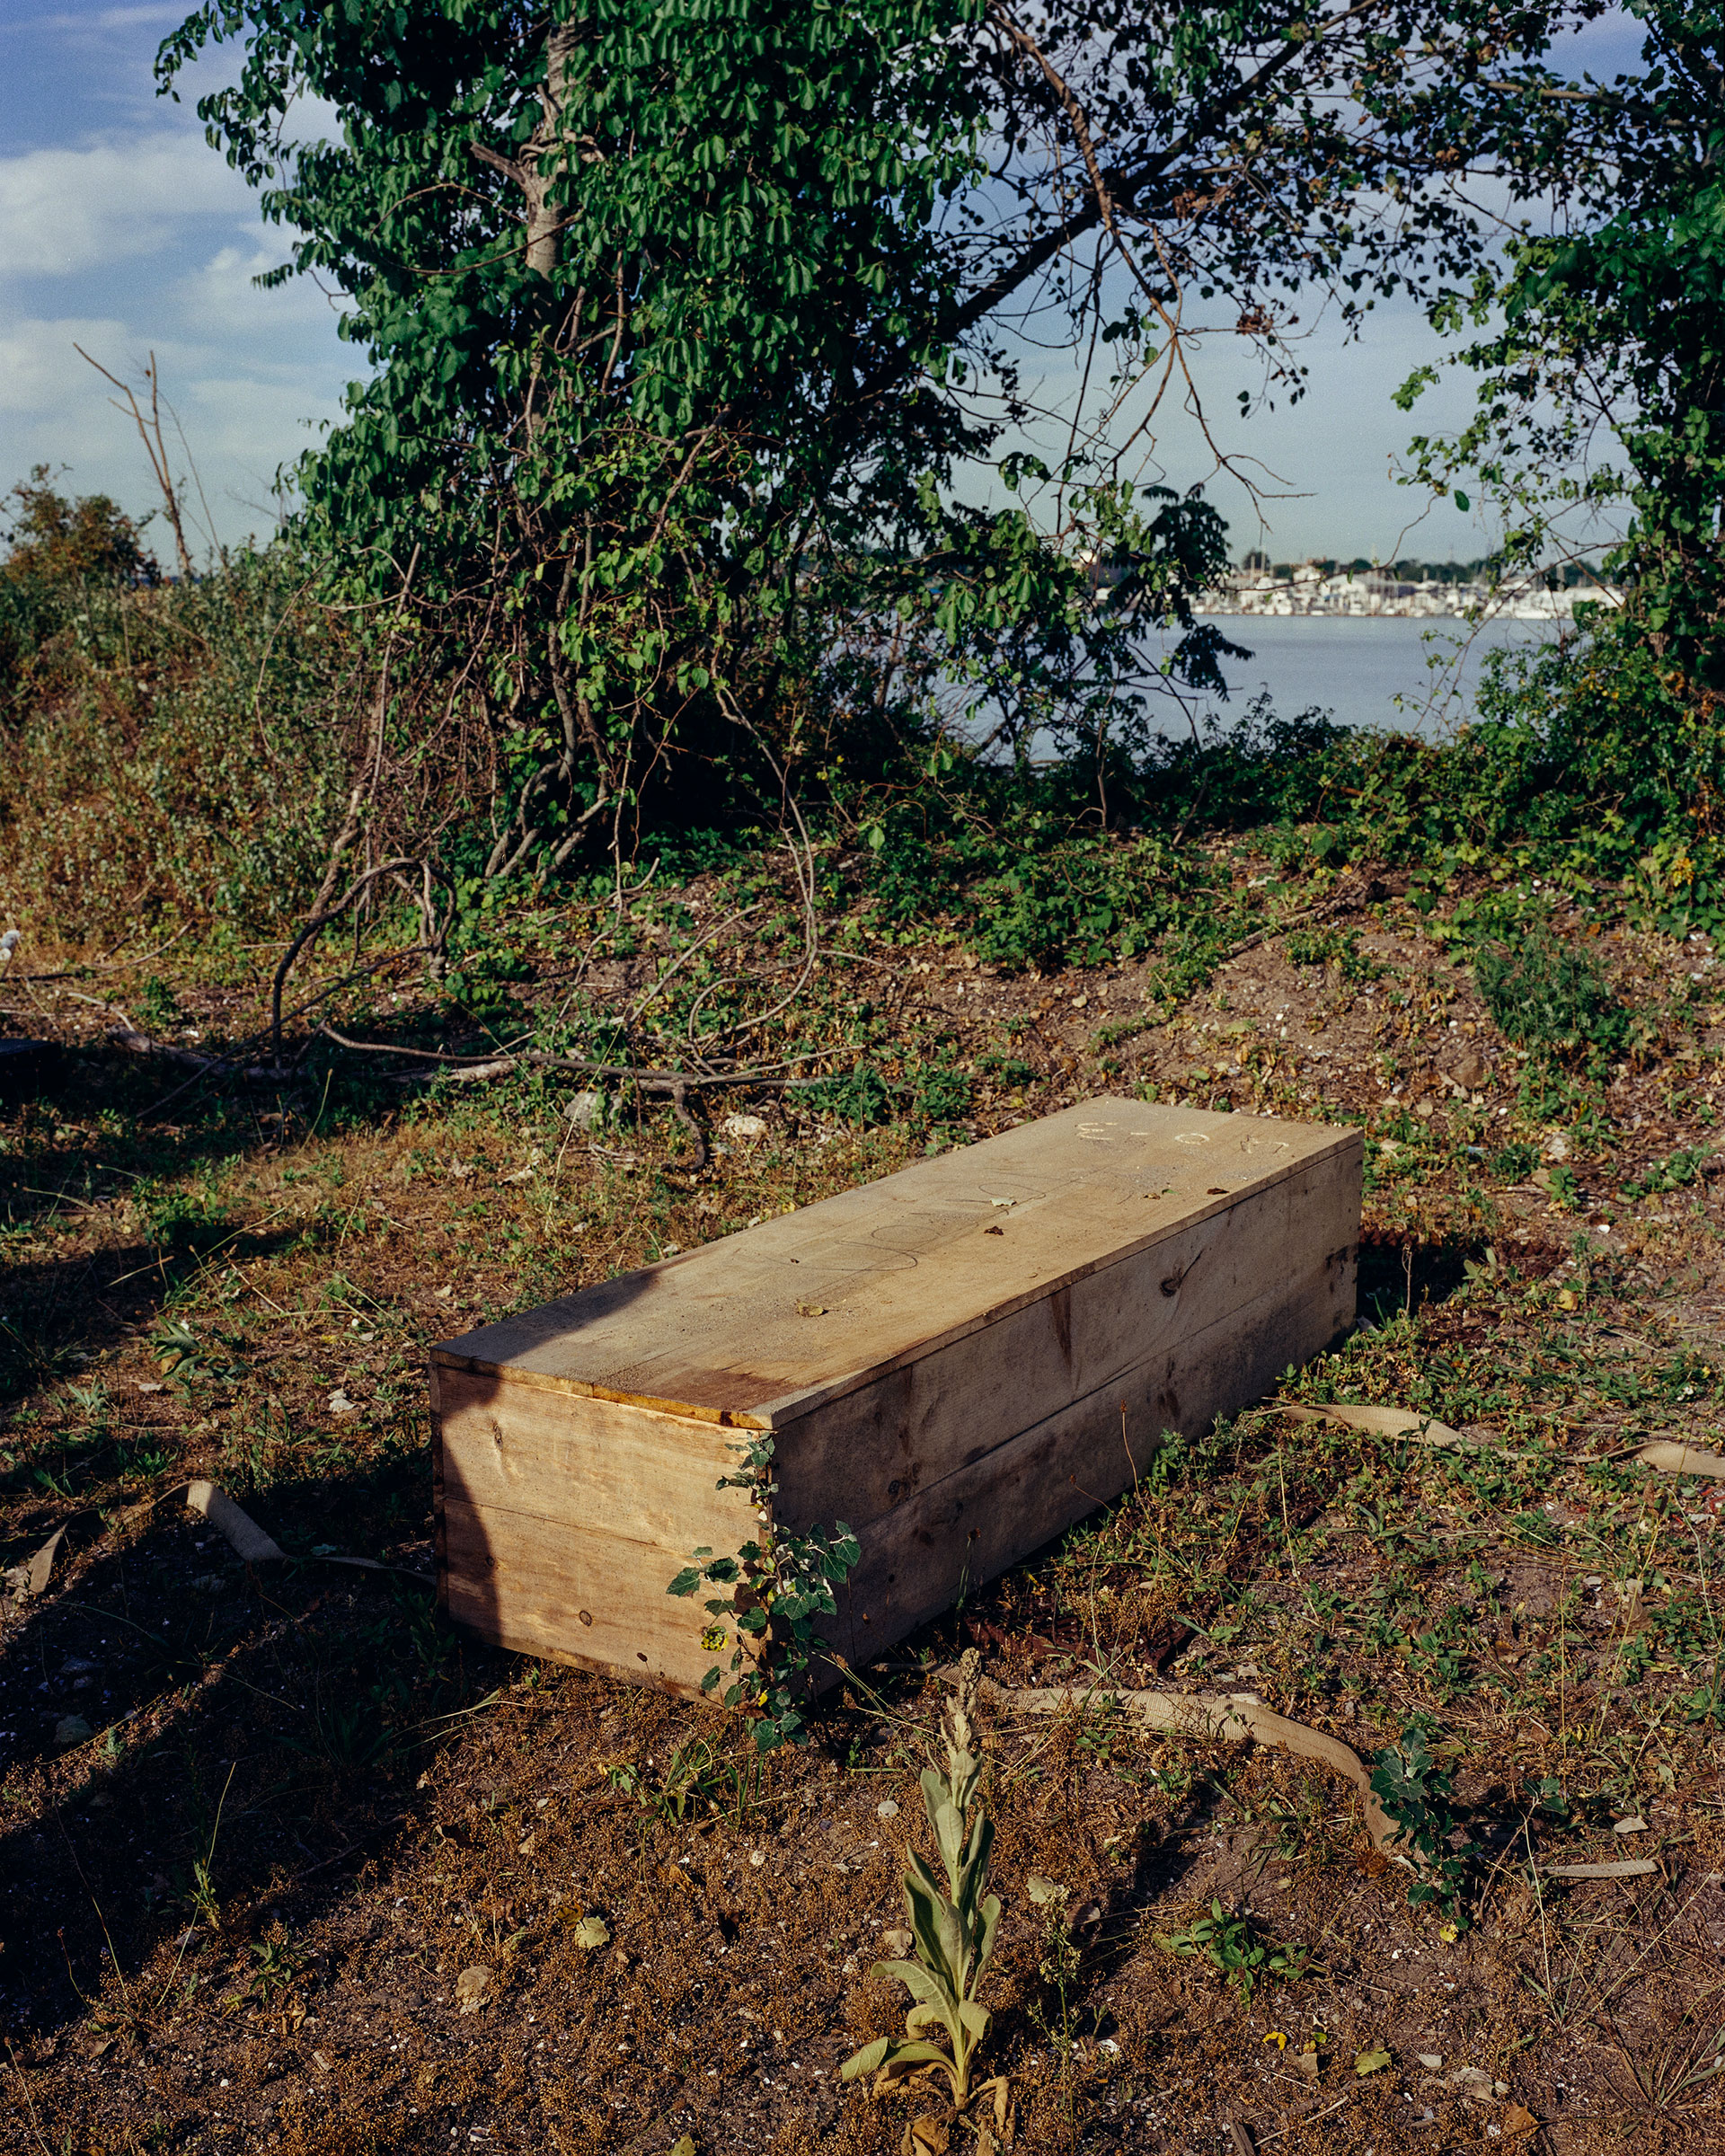 After being exhumed from Hart Island’s mass grave, Ellen Torron’s casket is prepared for the ferry ride back to the city. (Sasha Arutyunova for TIME)